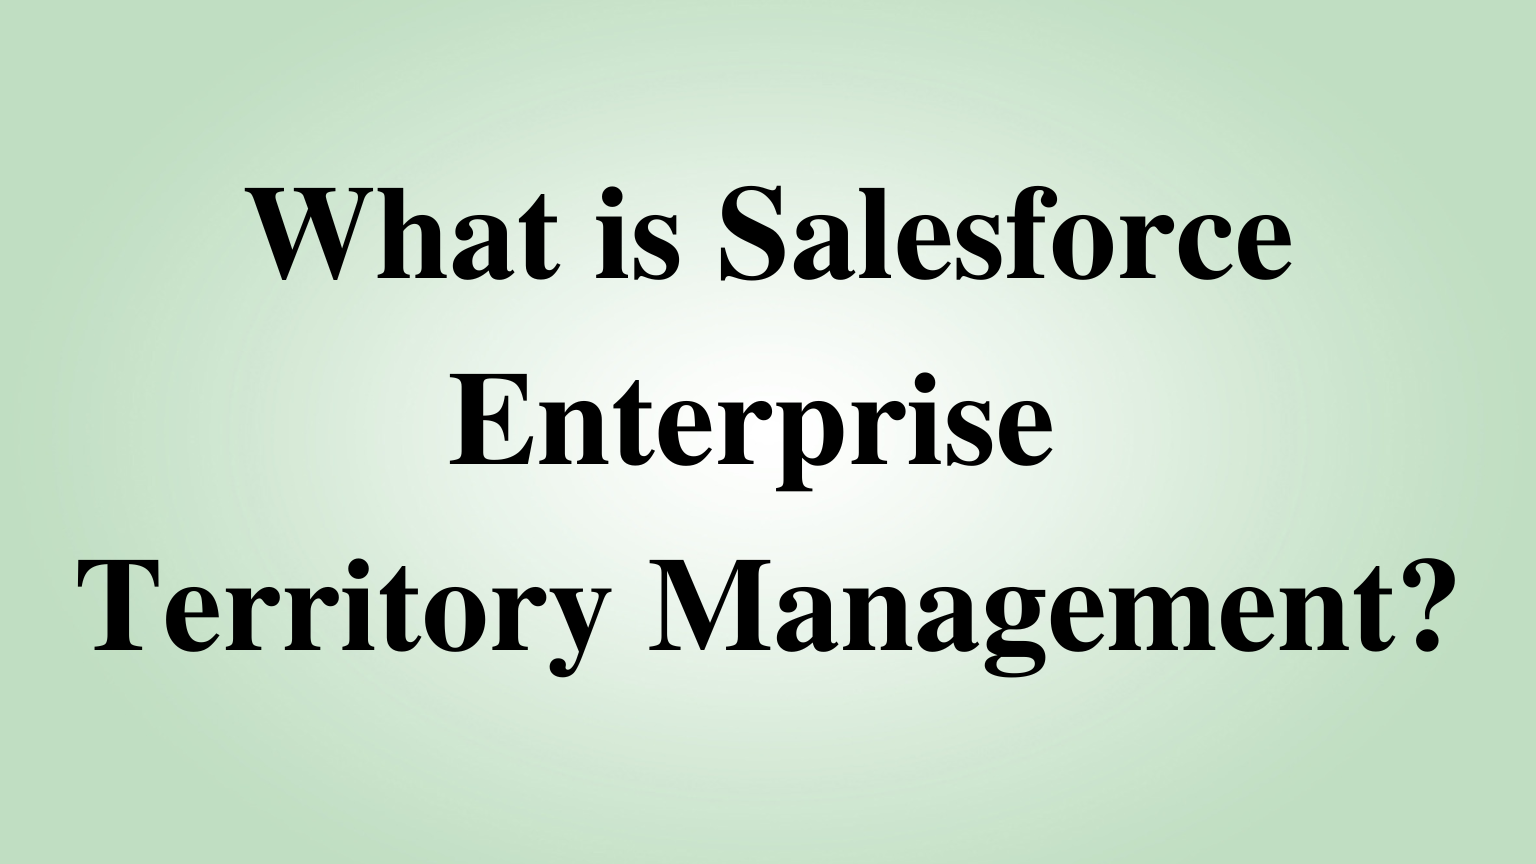 What is Salesforce Enterprise Territory Management